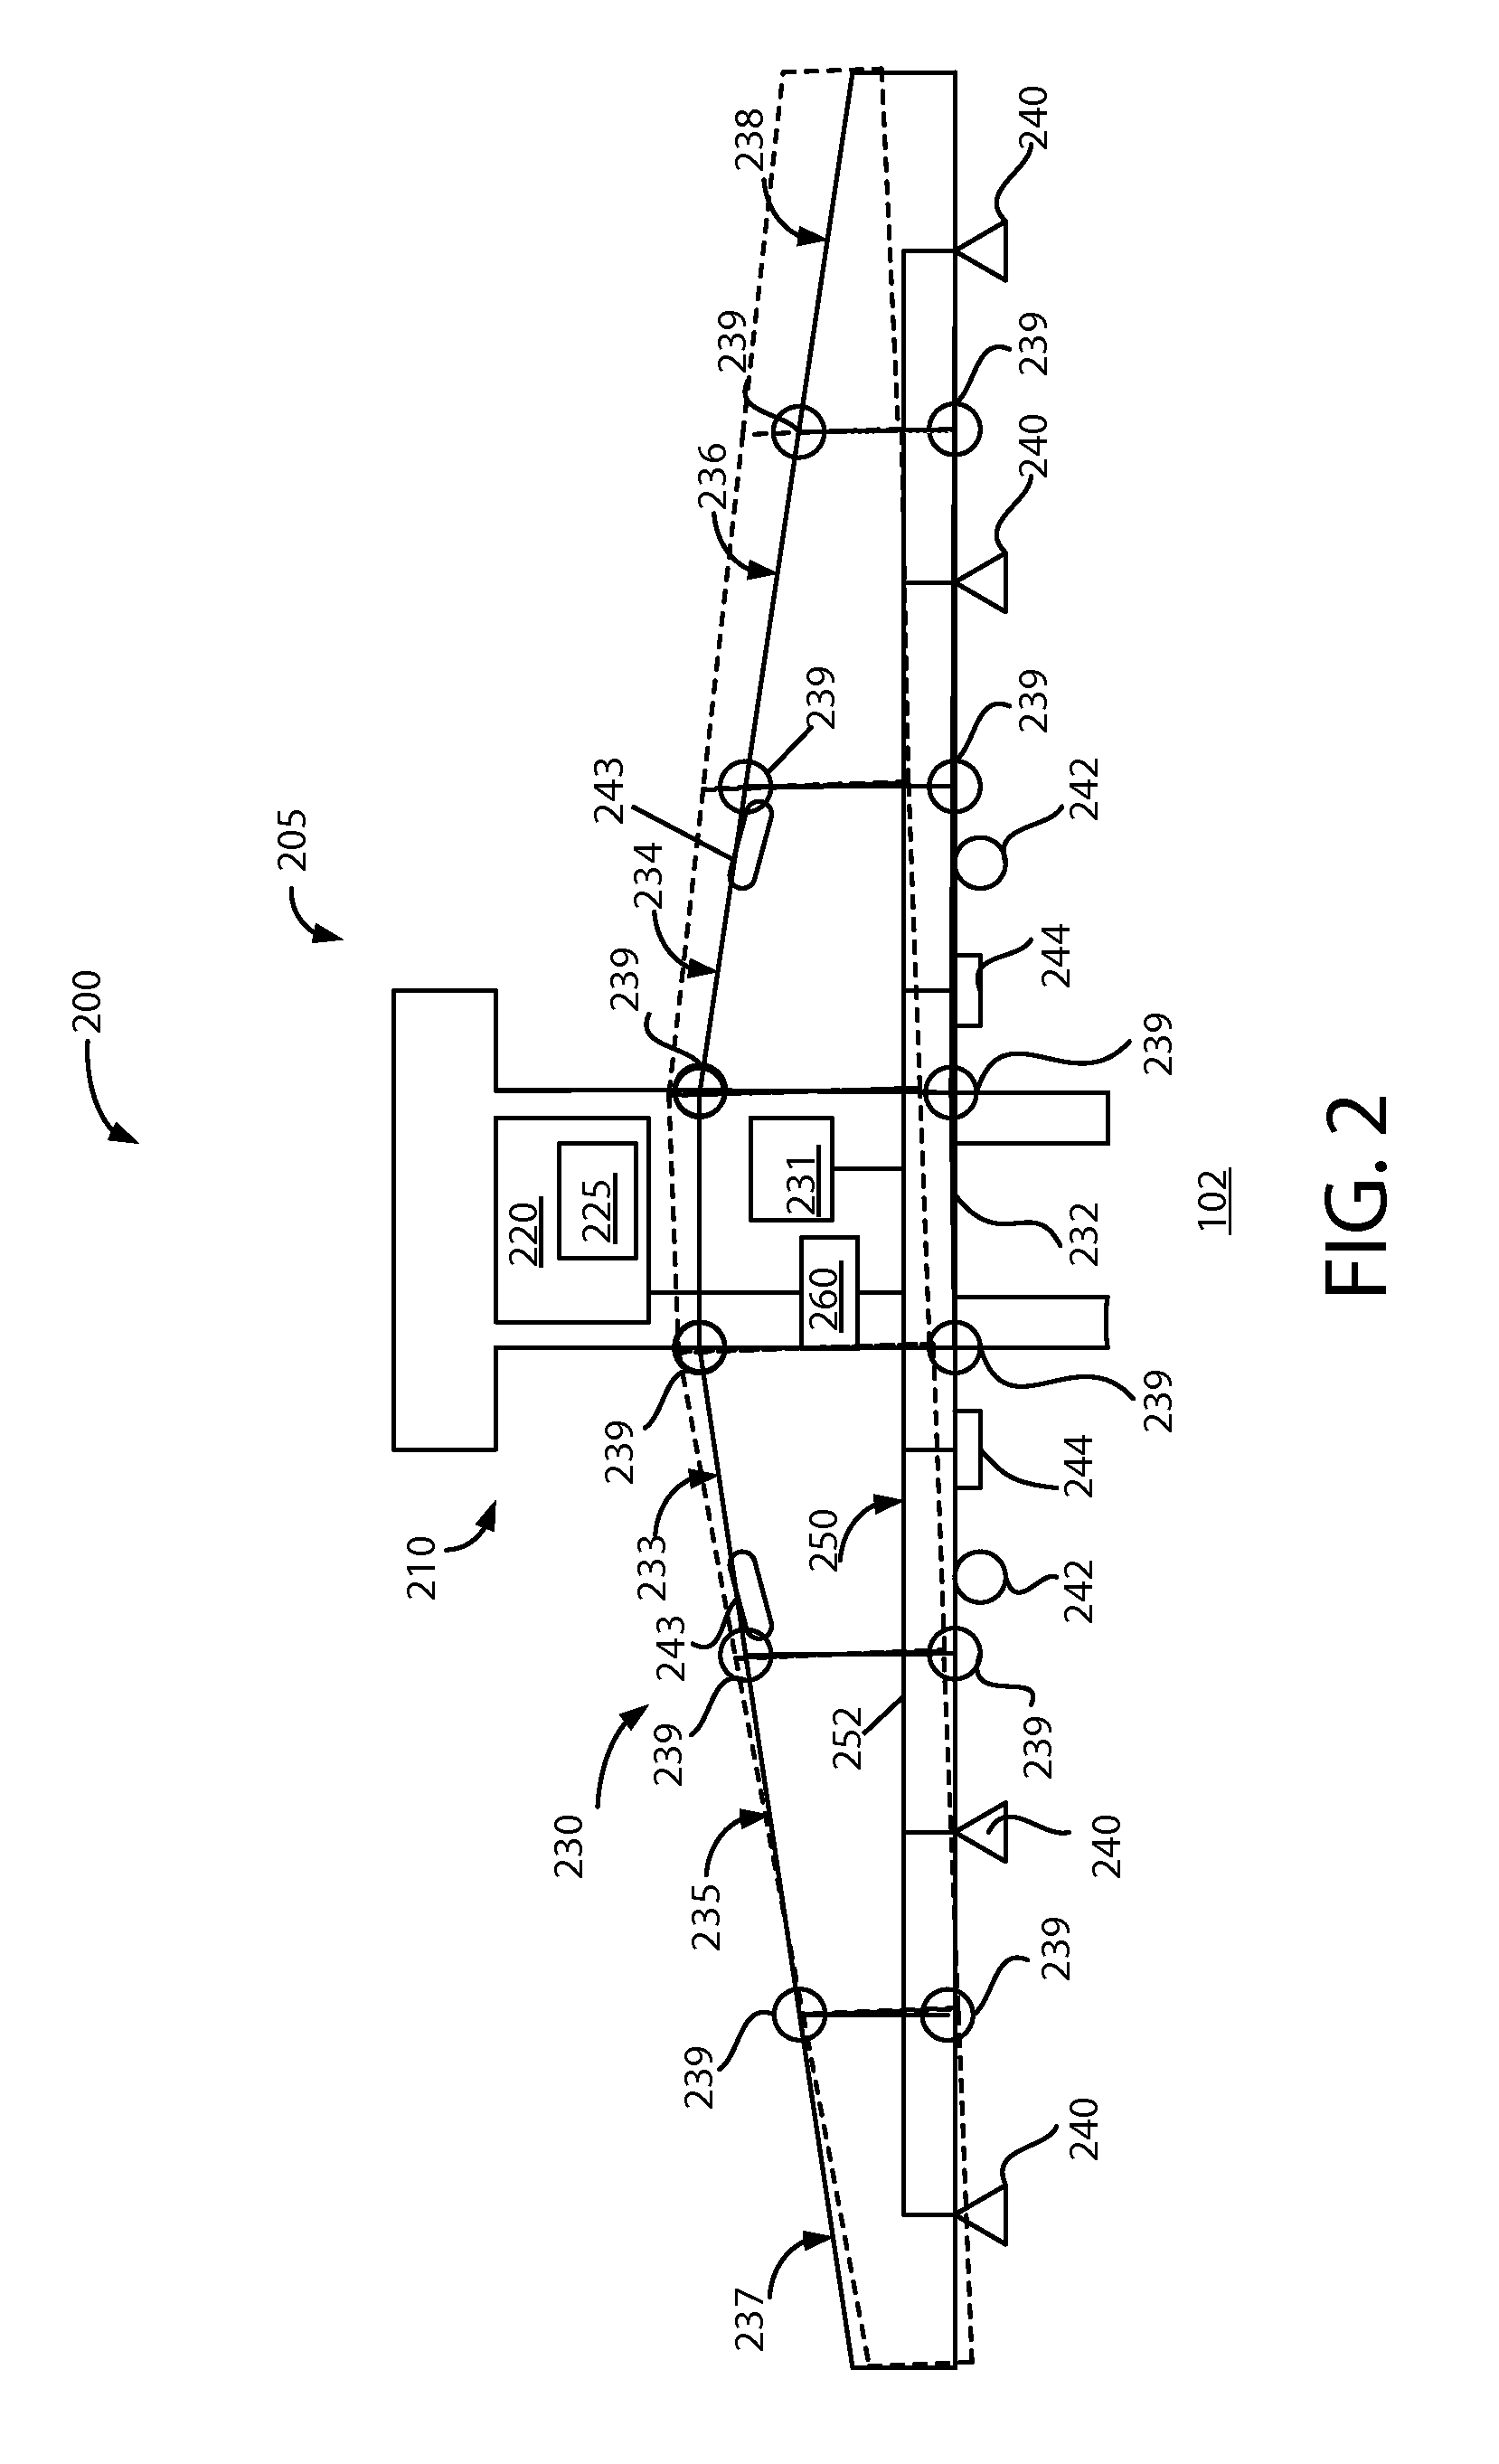 Method to Enhance Performance of Sensor-Based Implement Height Control